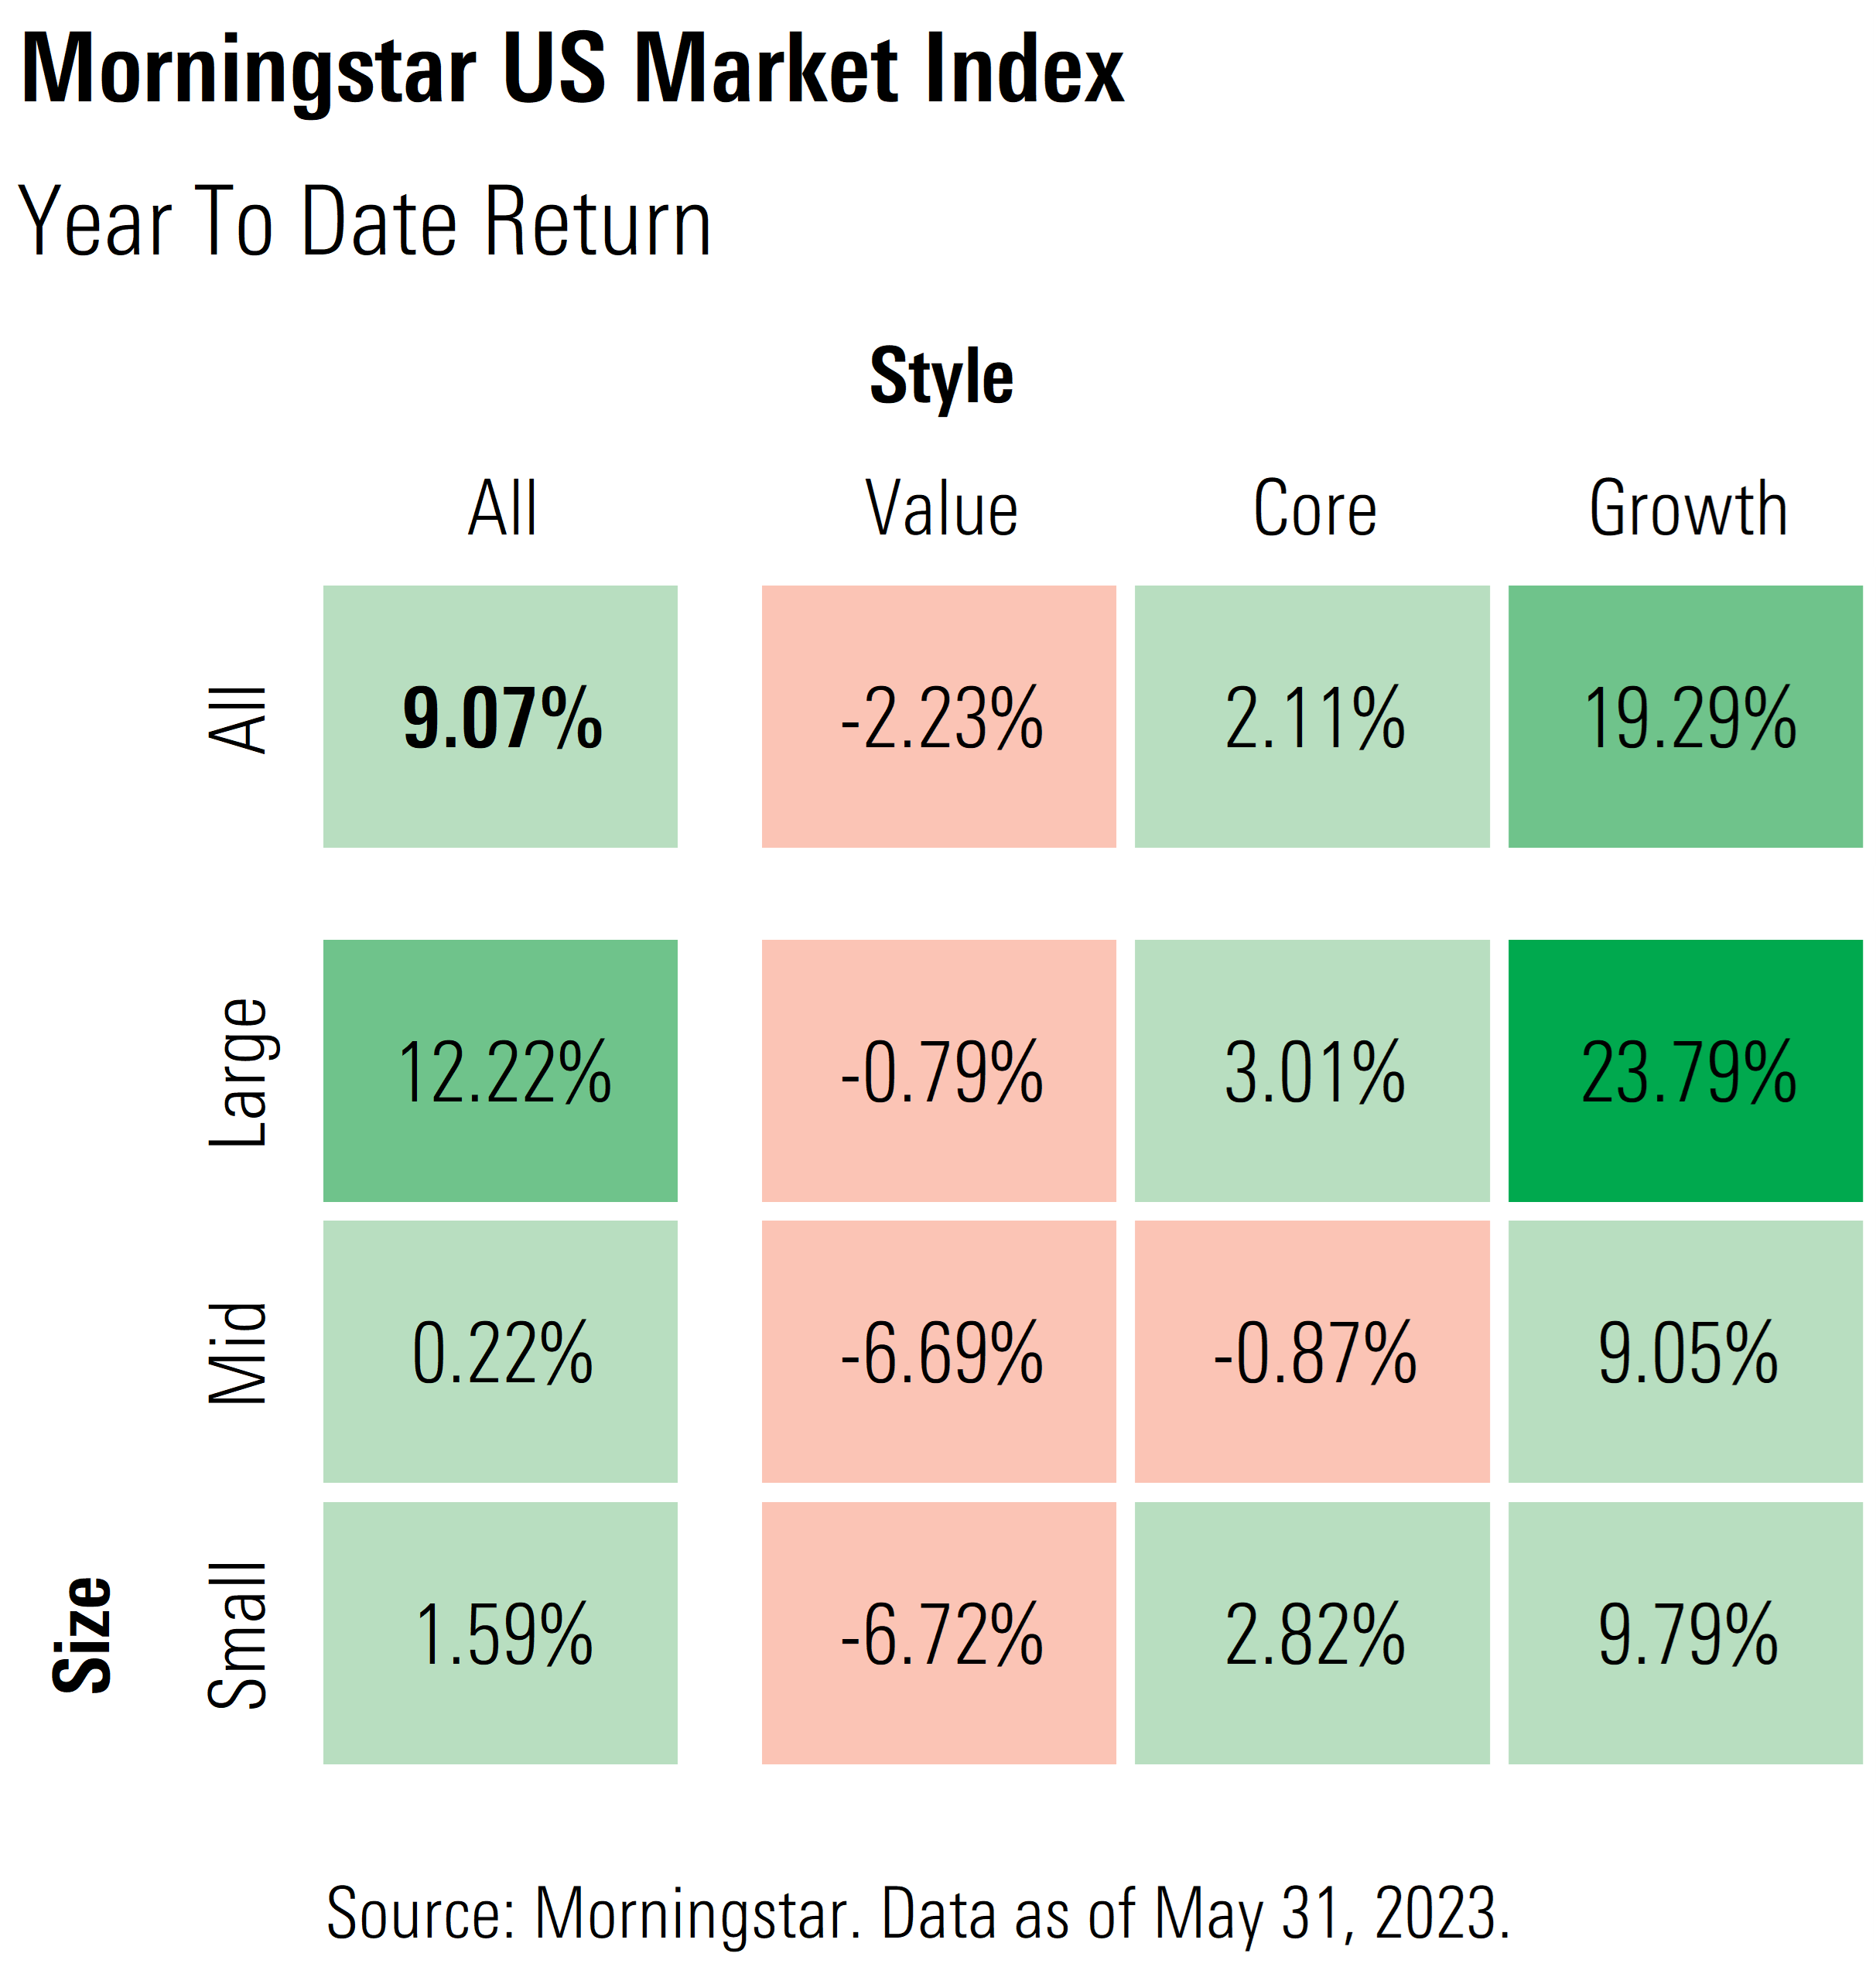 Graphic containing Morningstar US Market Index year to date returns by style box